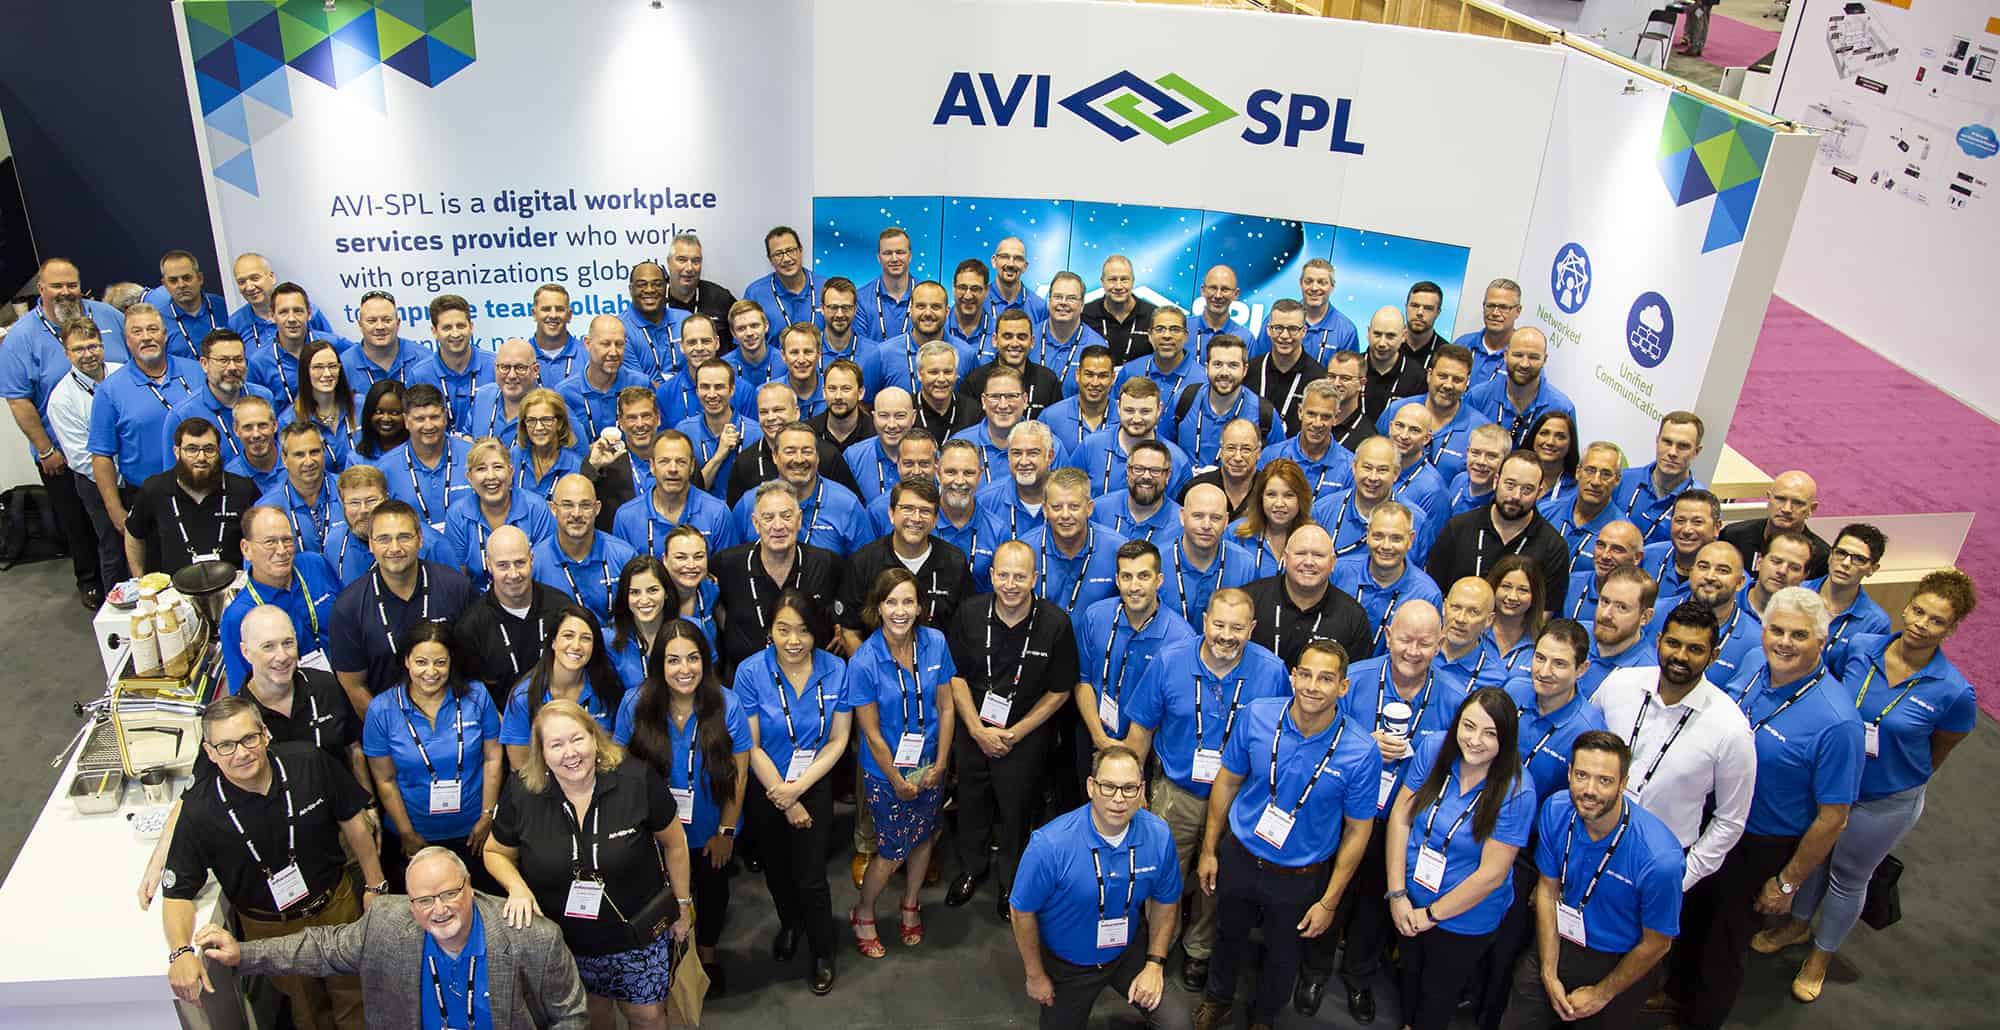 group of AVI-SPL employees at trade show